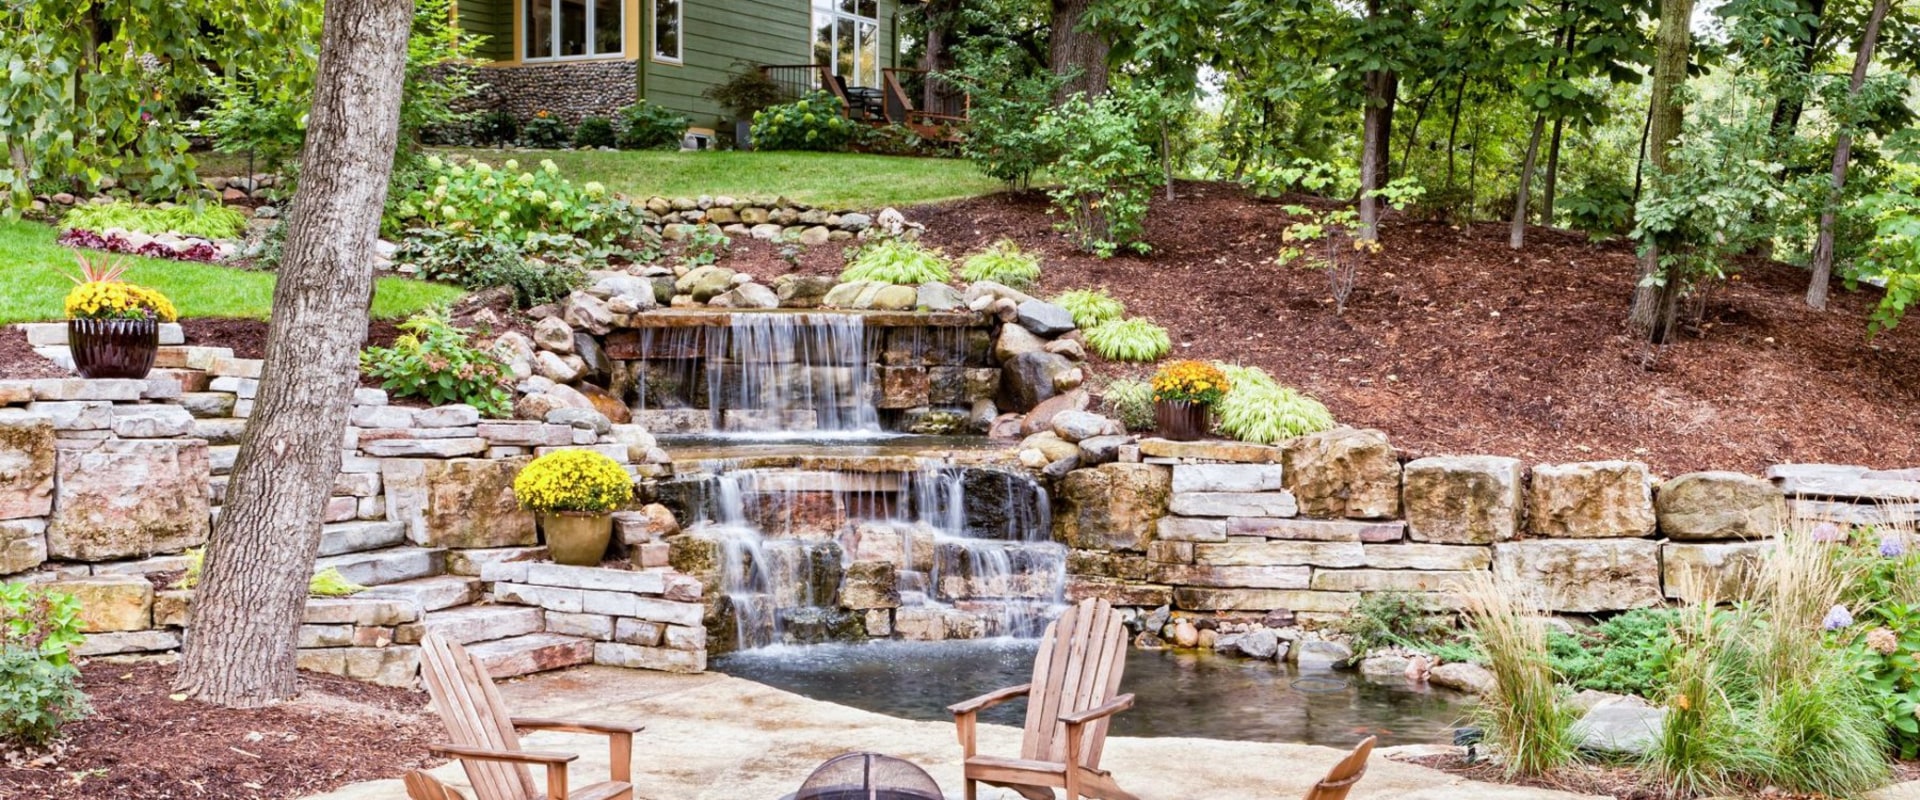 What are hardscape features?